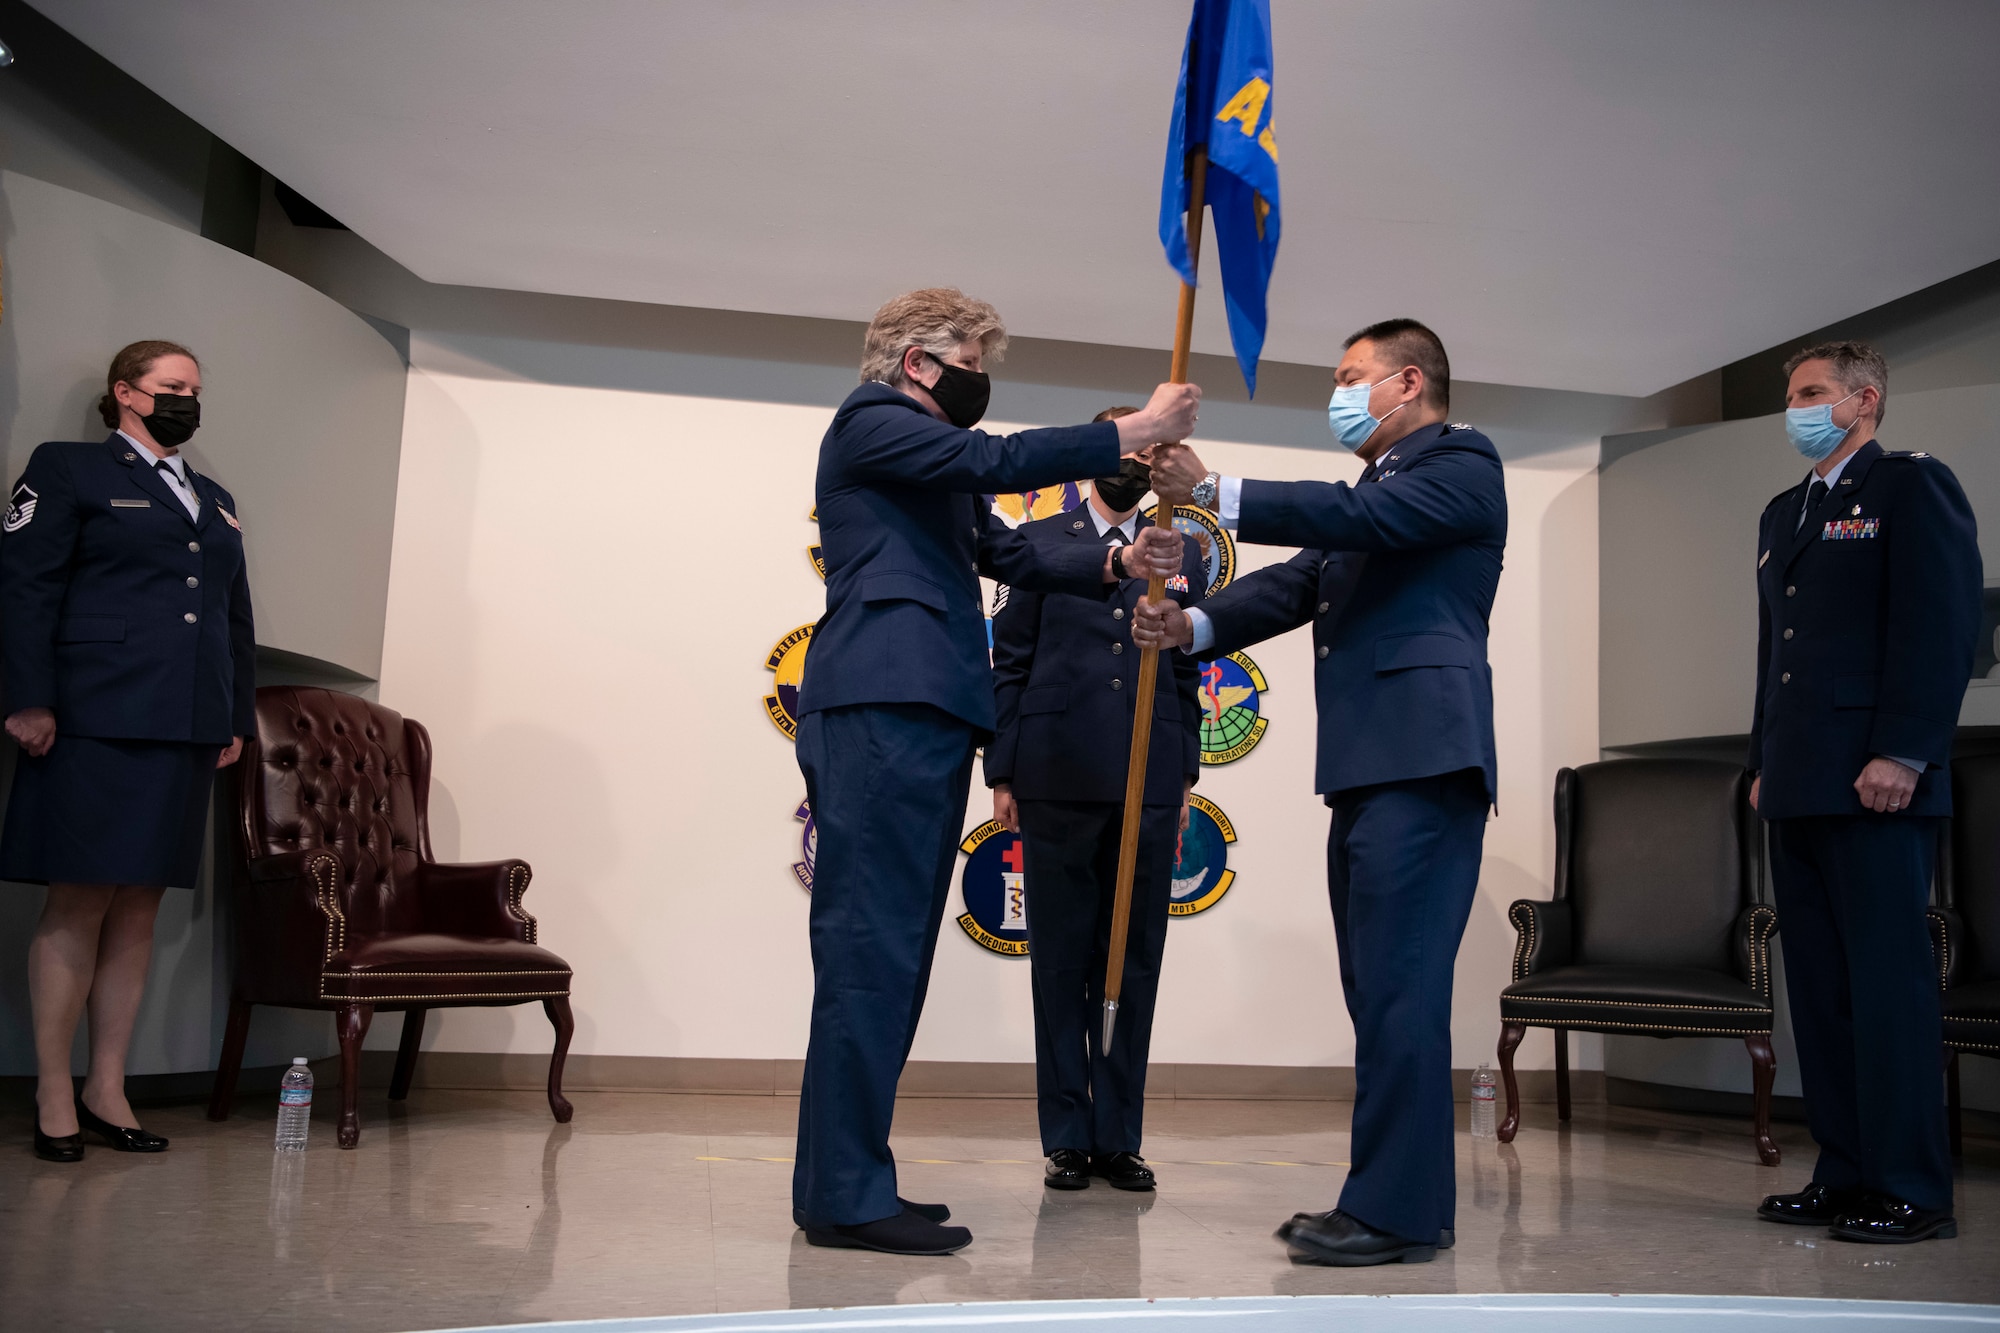 Change of Command Ceremony for the 349th Aeromedical Staging Squadron